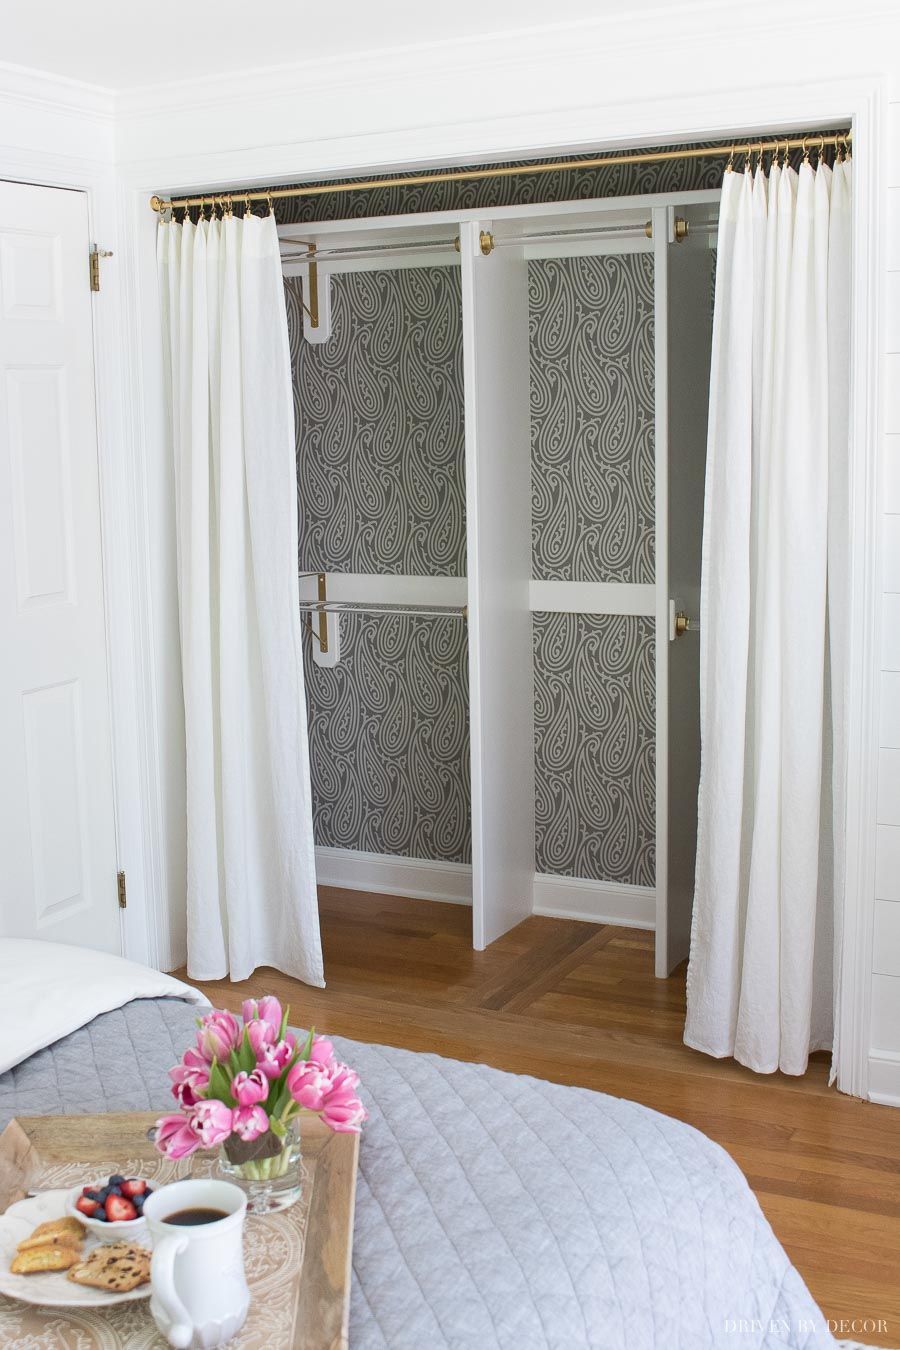 Use curtains instead of closet doors via Driven by Decor